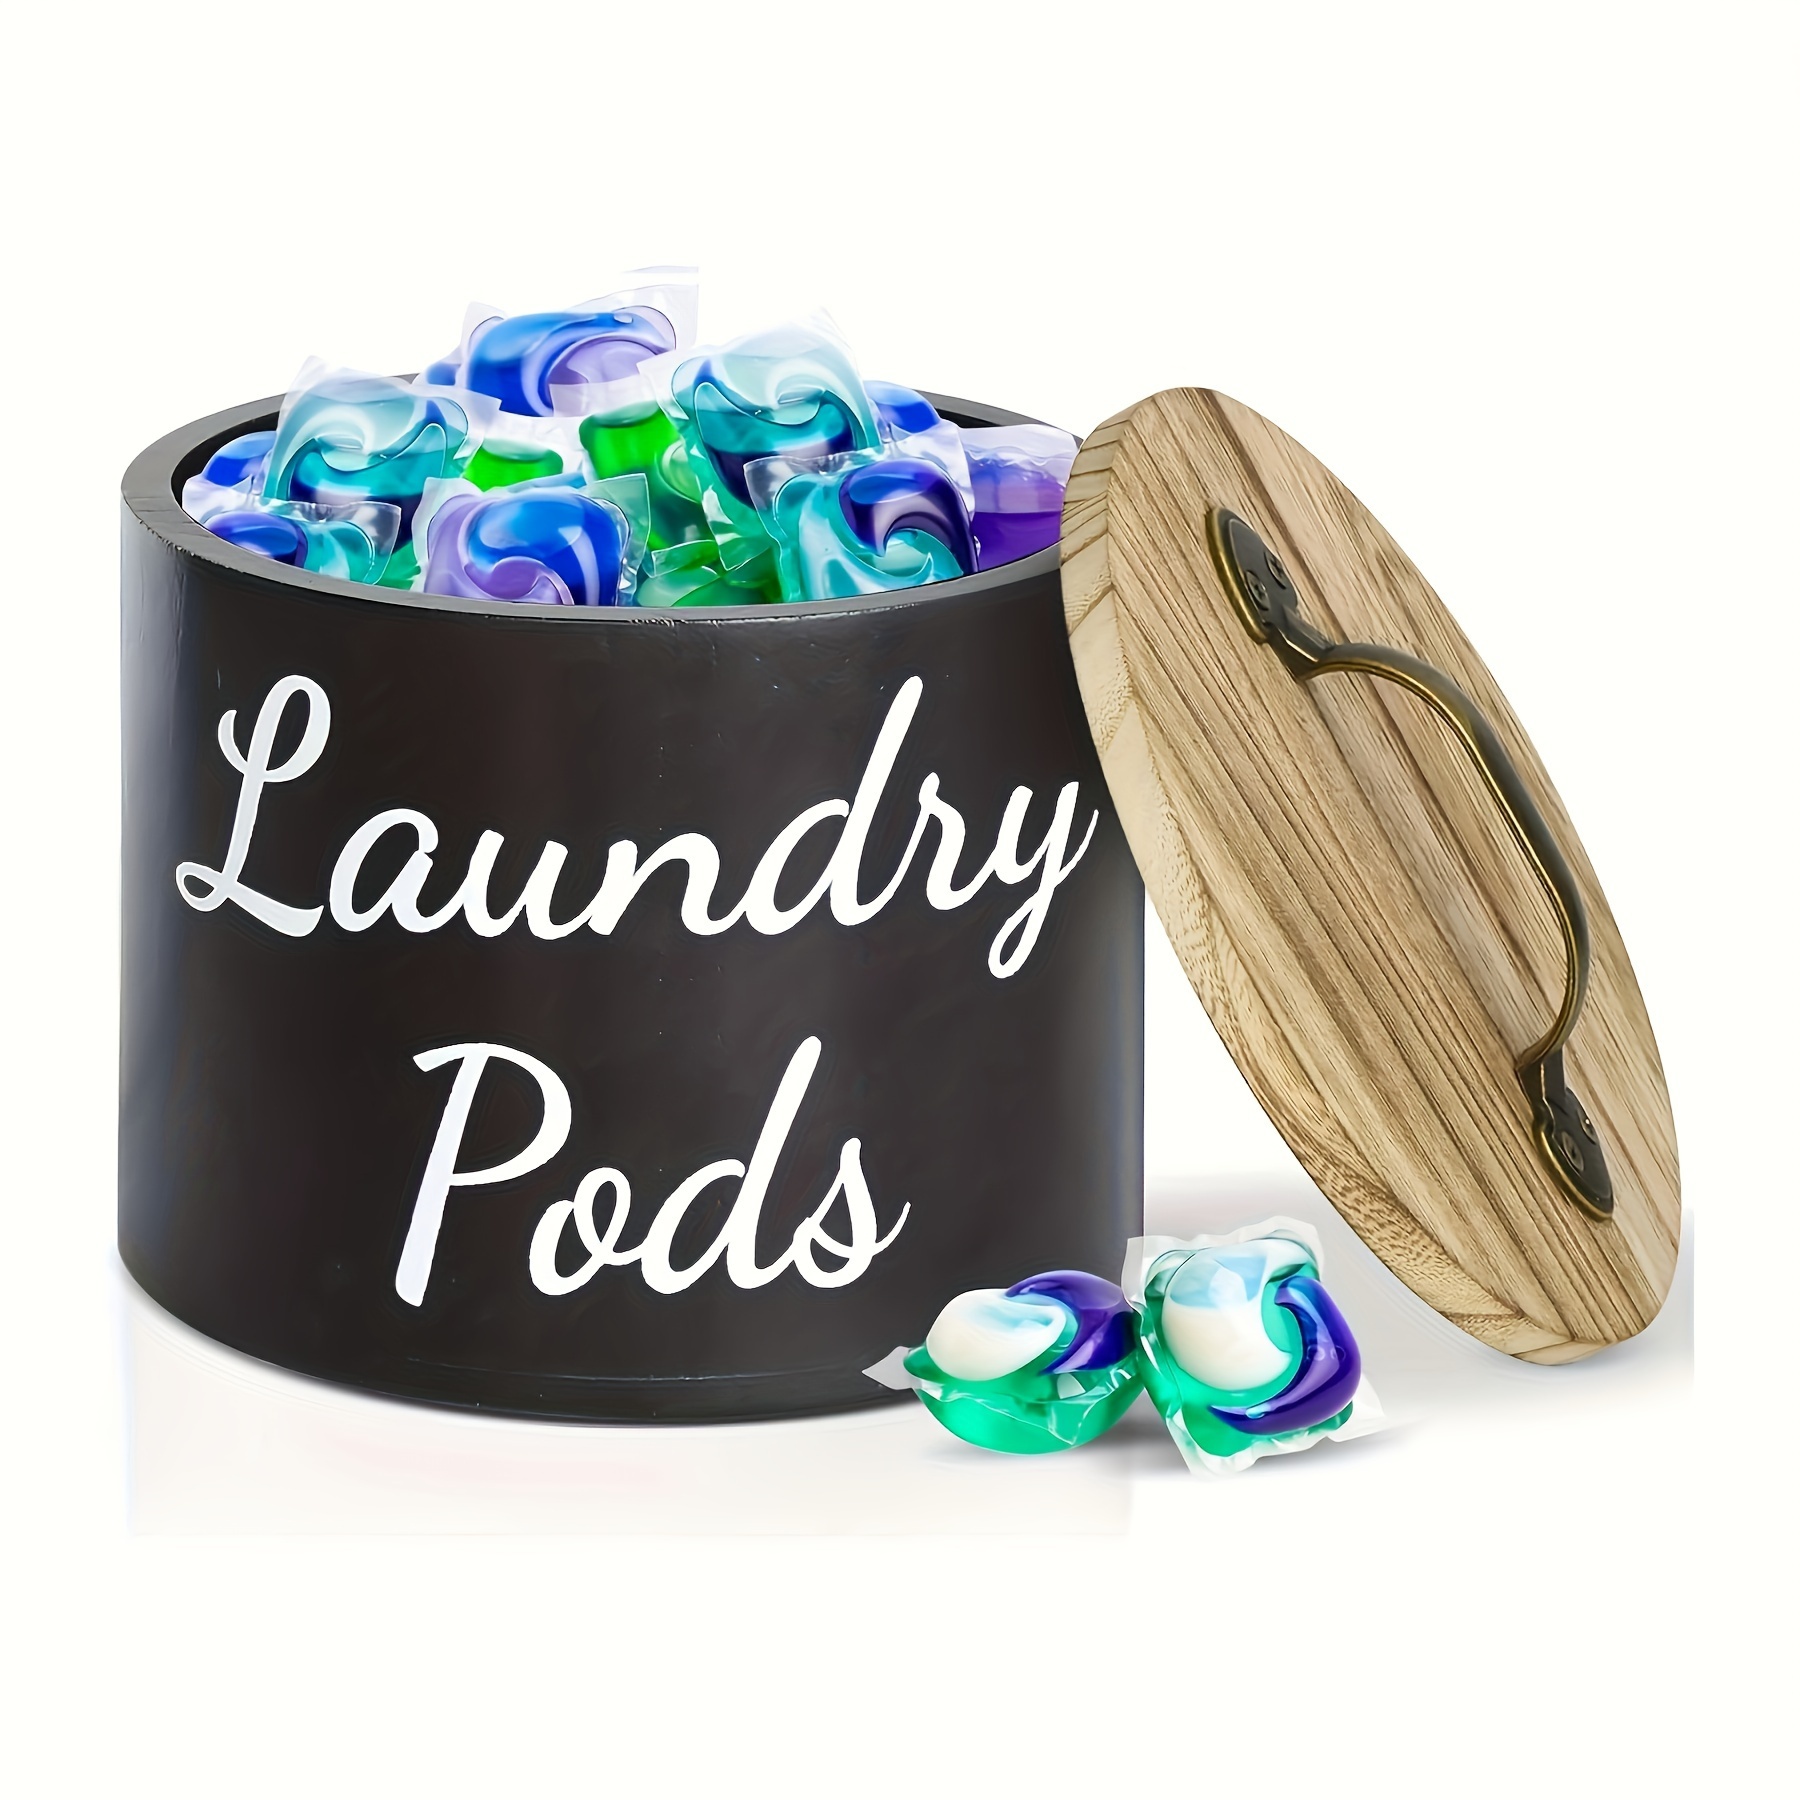 

1pc Laundry Pods Container With Lid, For Laundry Room Organization, Wooden Dryer Sheet Holder, Laundry Pod Storage Container, Fabric Softener Dispenser, Farmhouse Laundry Room Decor